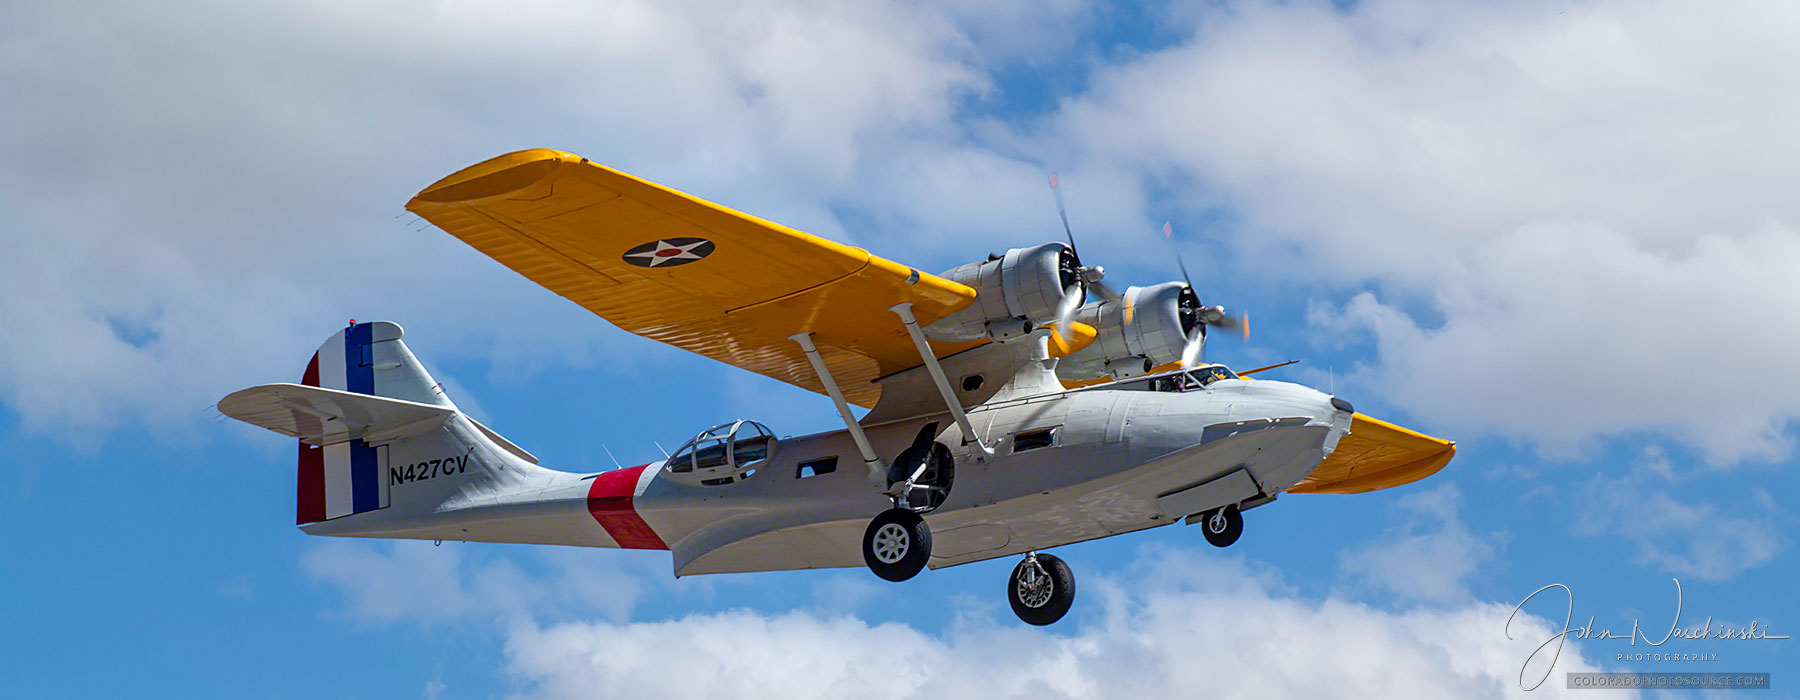 The amphibious Consolidated PBY Catalina